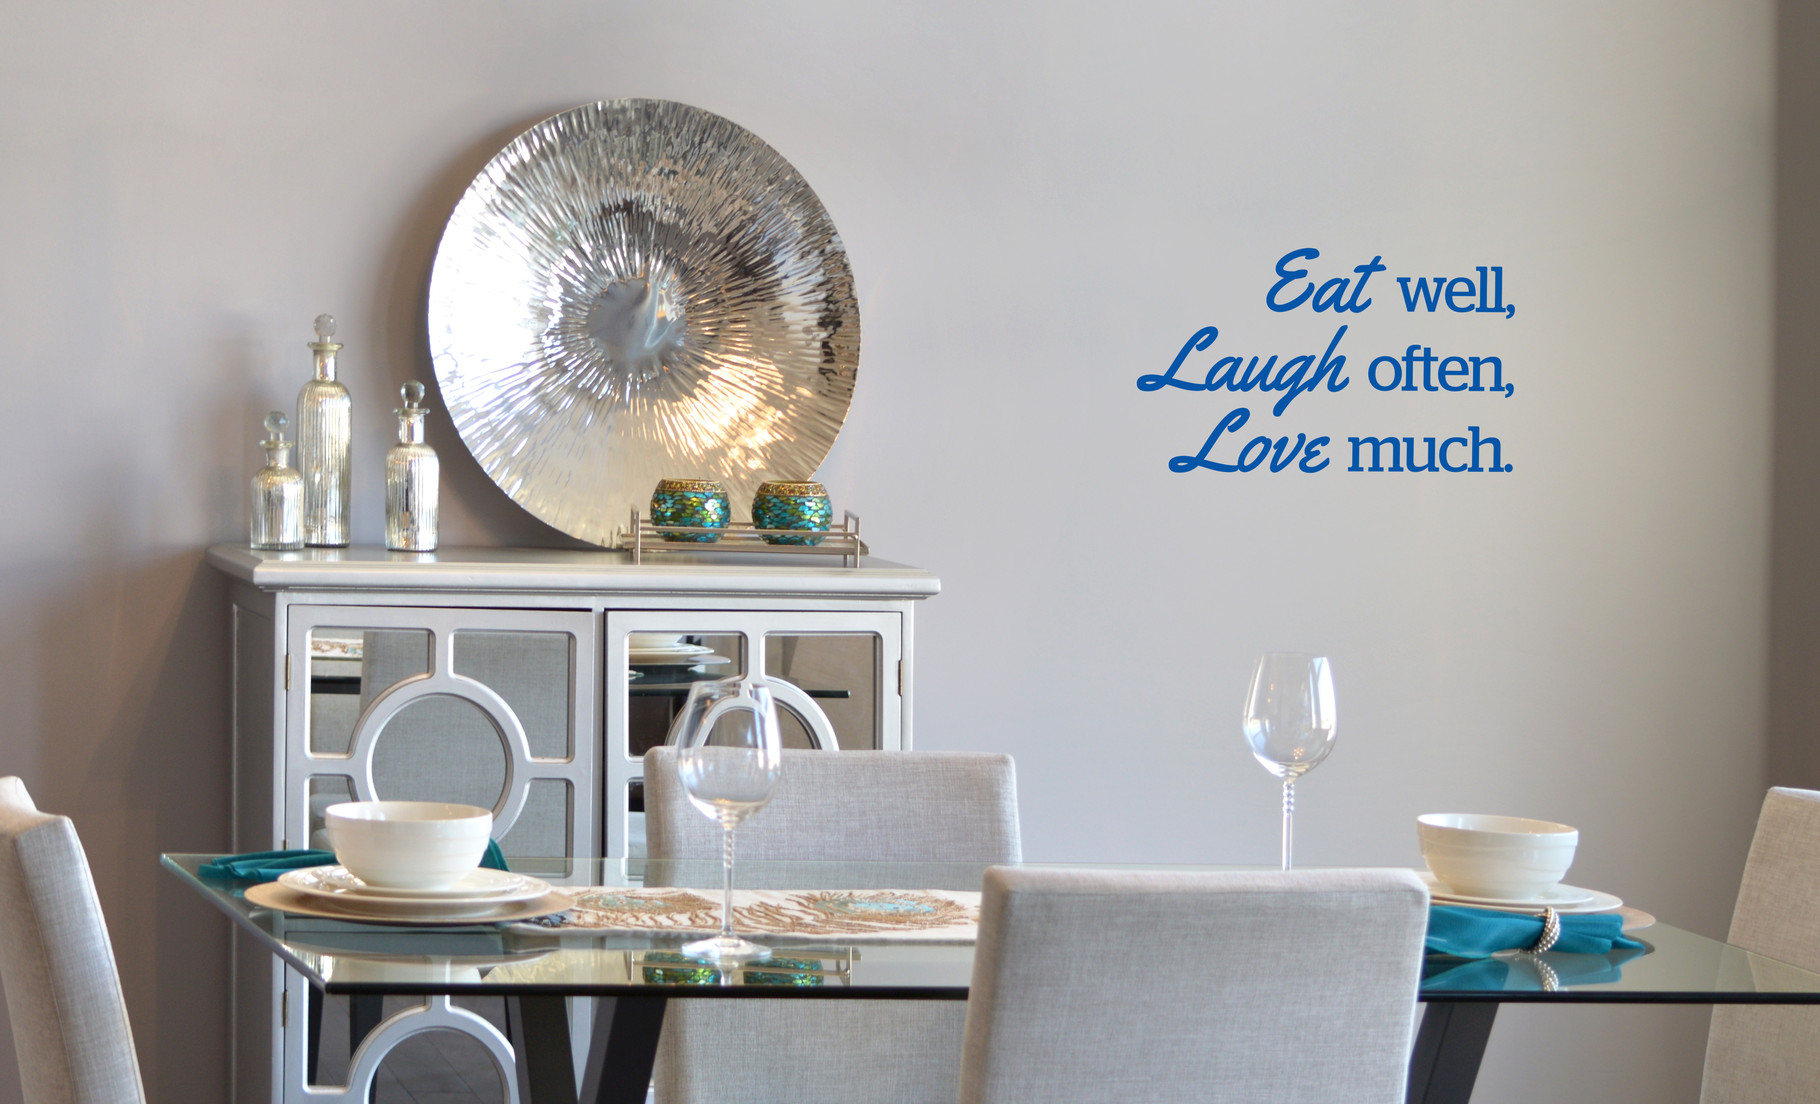 eat well laugh often love much dining room wall art or kitchen quote from wallart pany co uk